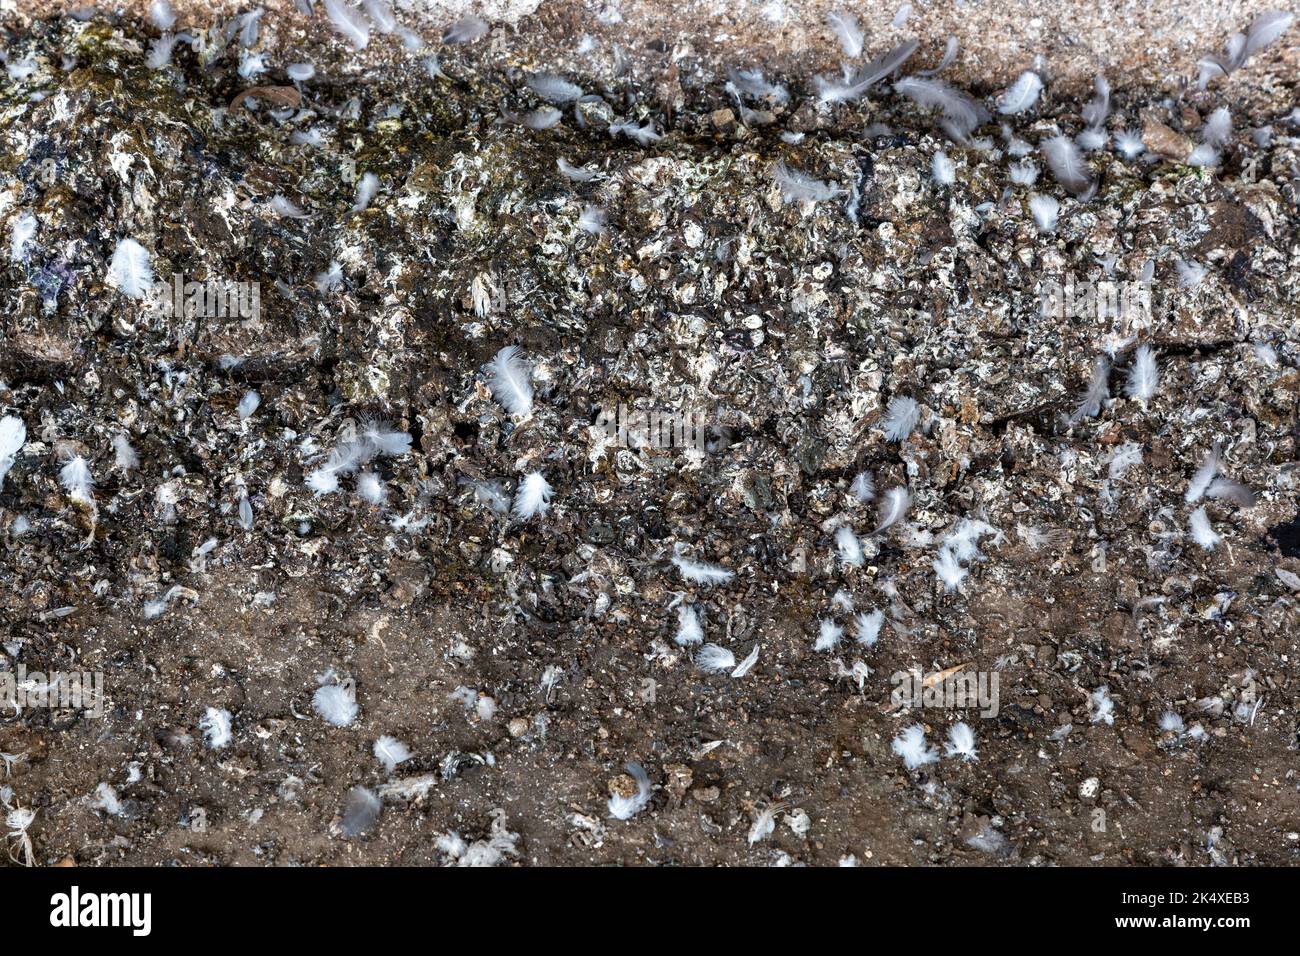 Background, pigeon droppings with bird feathers close-up Stock Photo